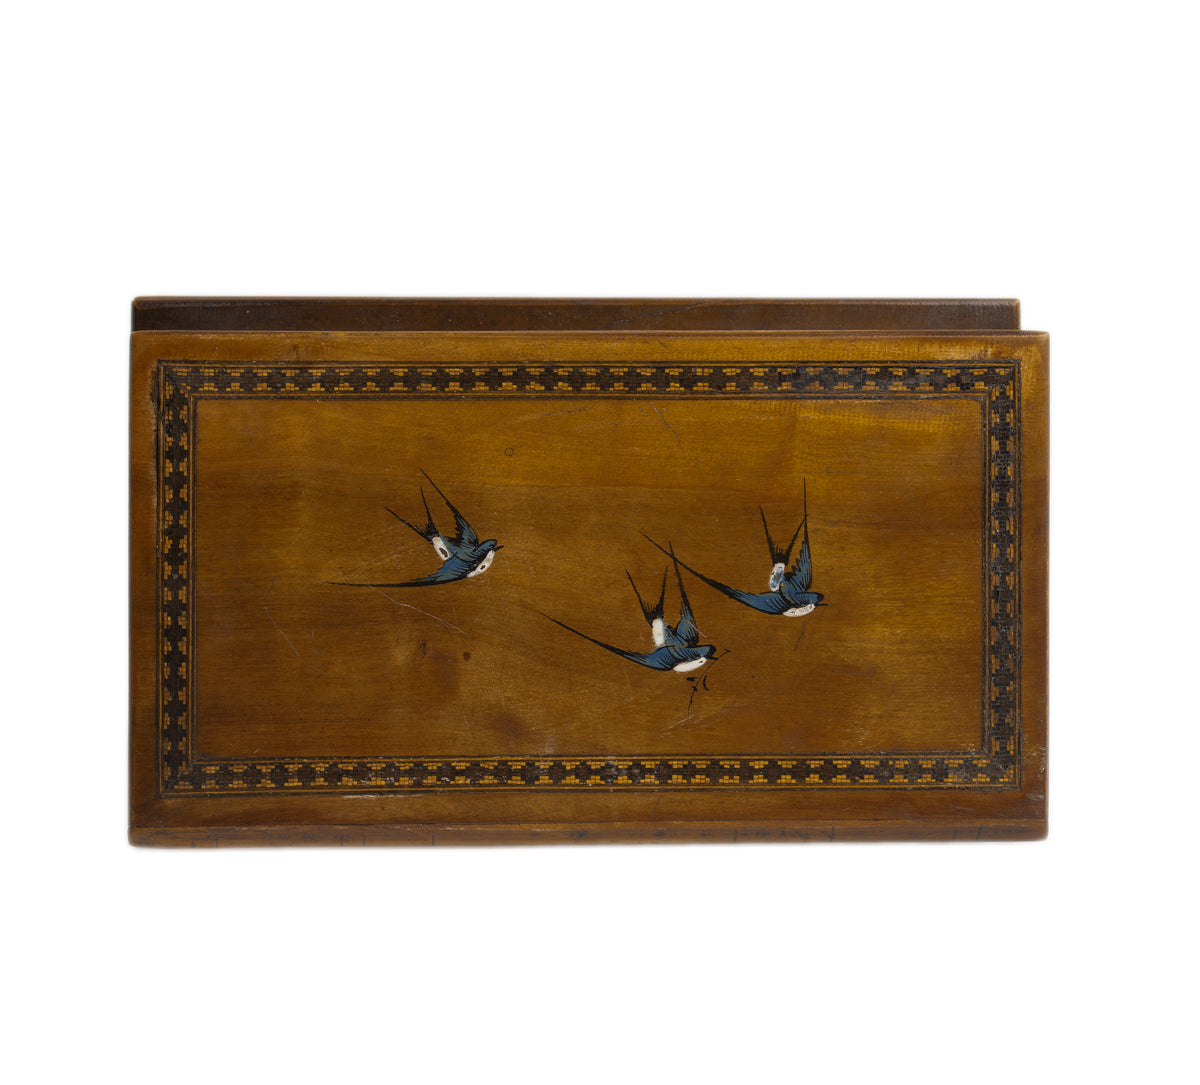 Italian Sorento Ware Jewellery Box In Olive Wood Antique c.1900 Hand Painted Lid (3069)